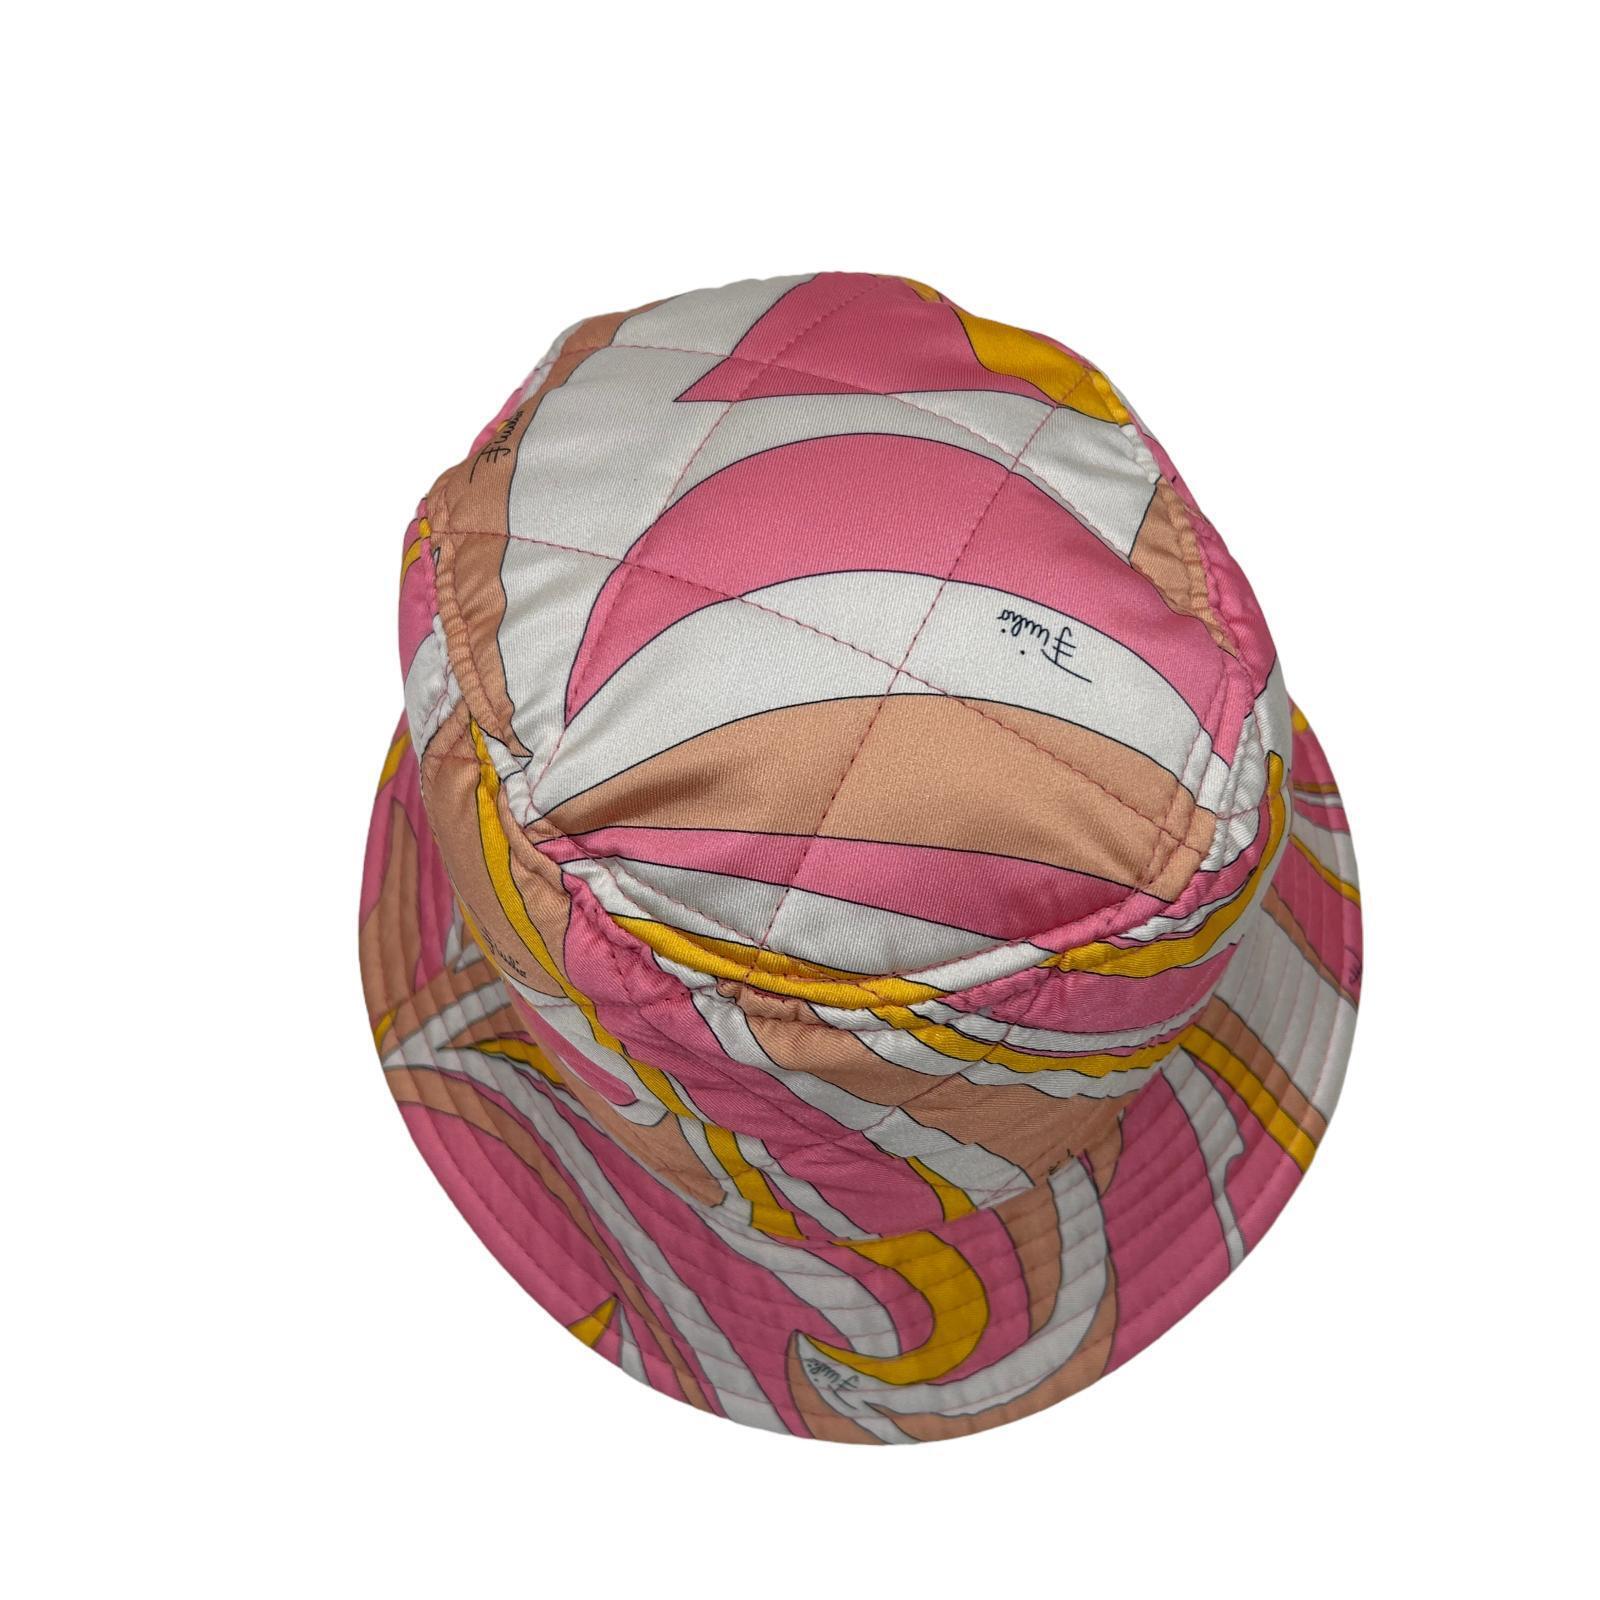 EMILIO PUCCI POLYESTER PRINT BUCKET HAT - PINK - SMALL - NEW | eBay